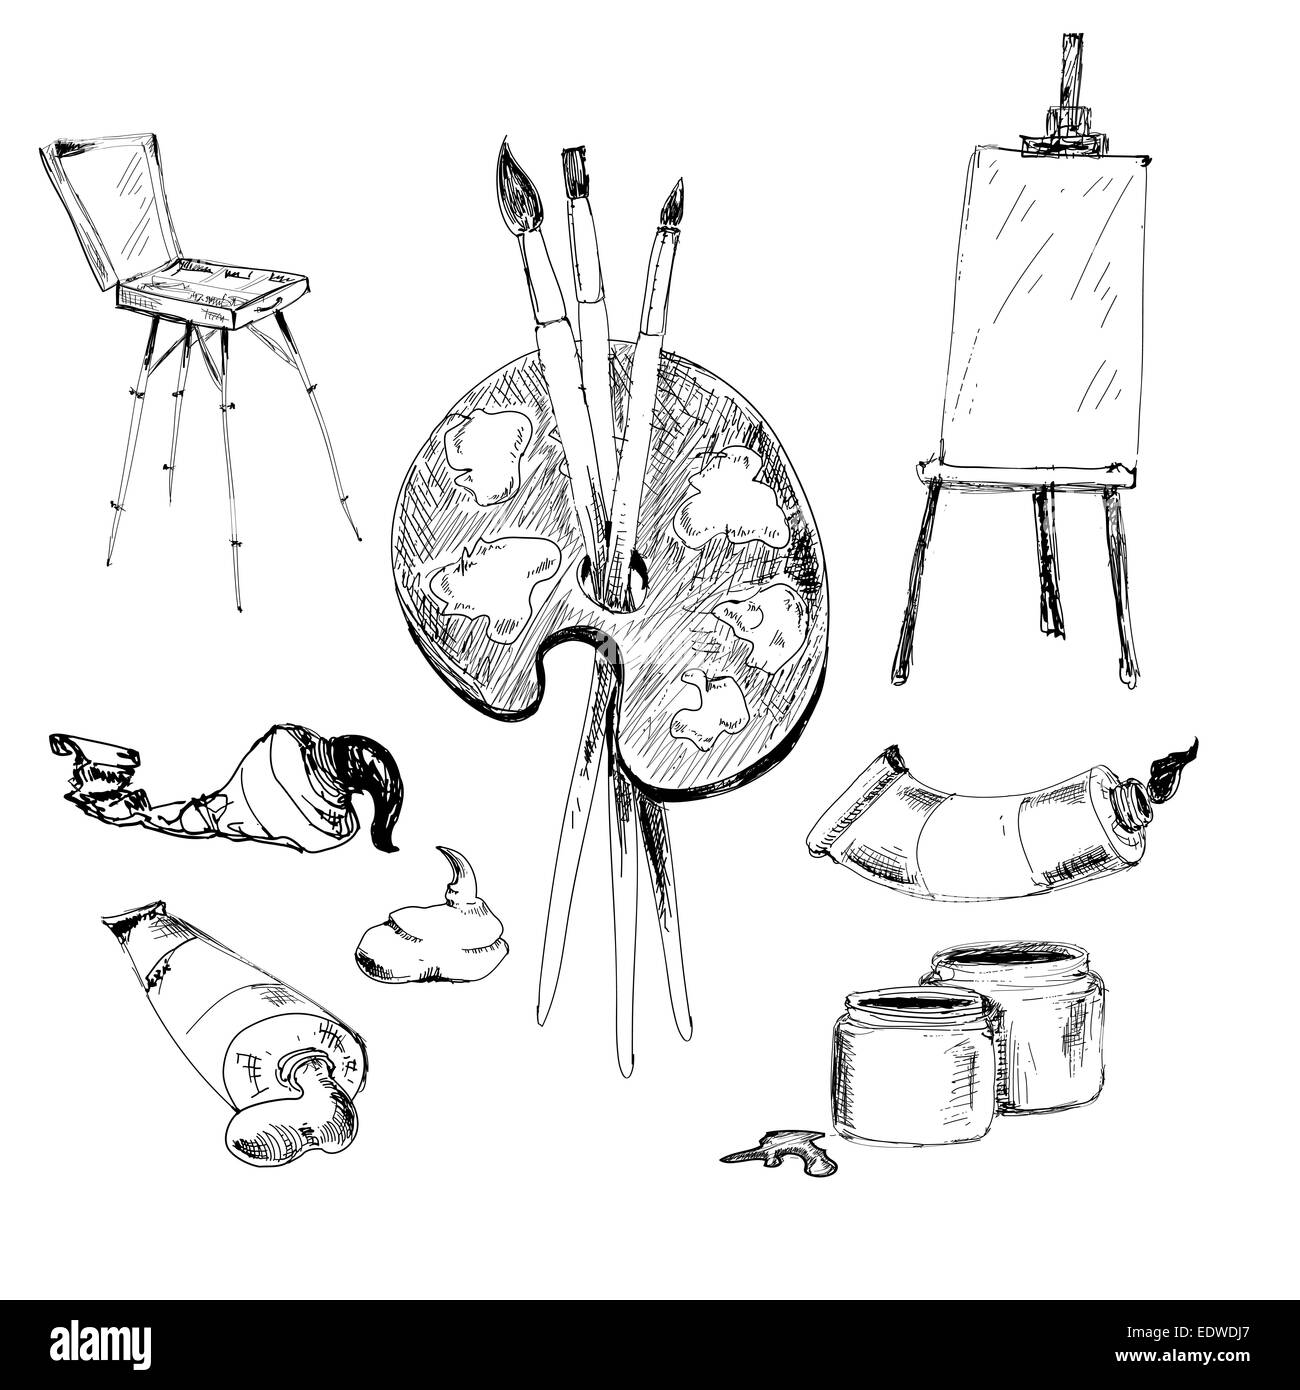 Accessories for painting. Collection of hand drawn illustrations Stock Photo